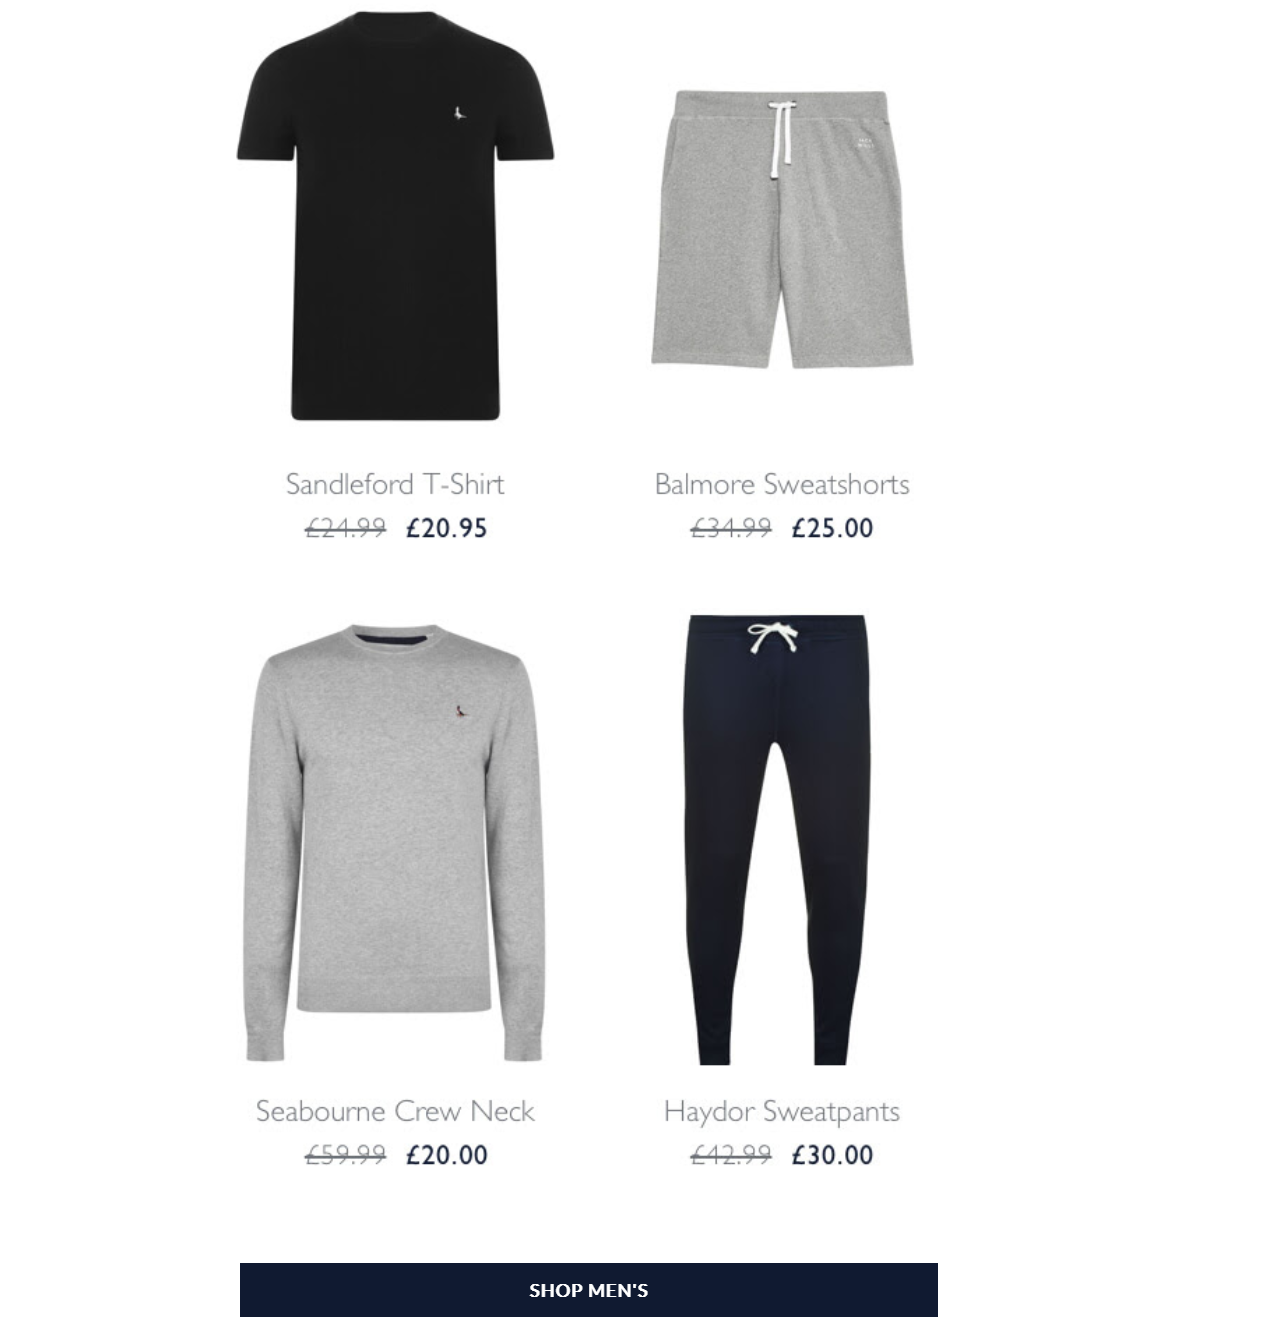  Get up to 30% OFF + Free Standard UK Delivery on orders over 50 Shop Now